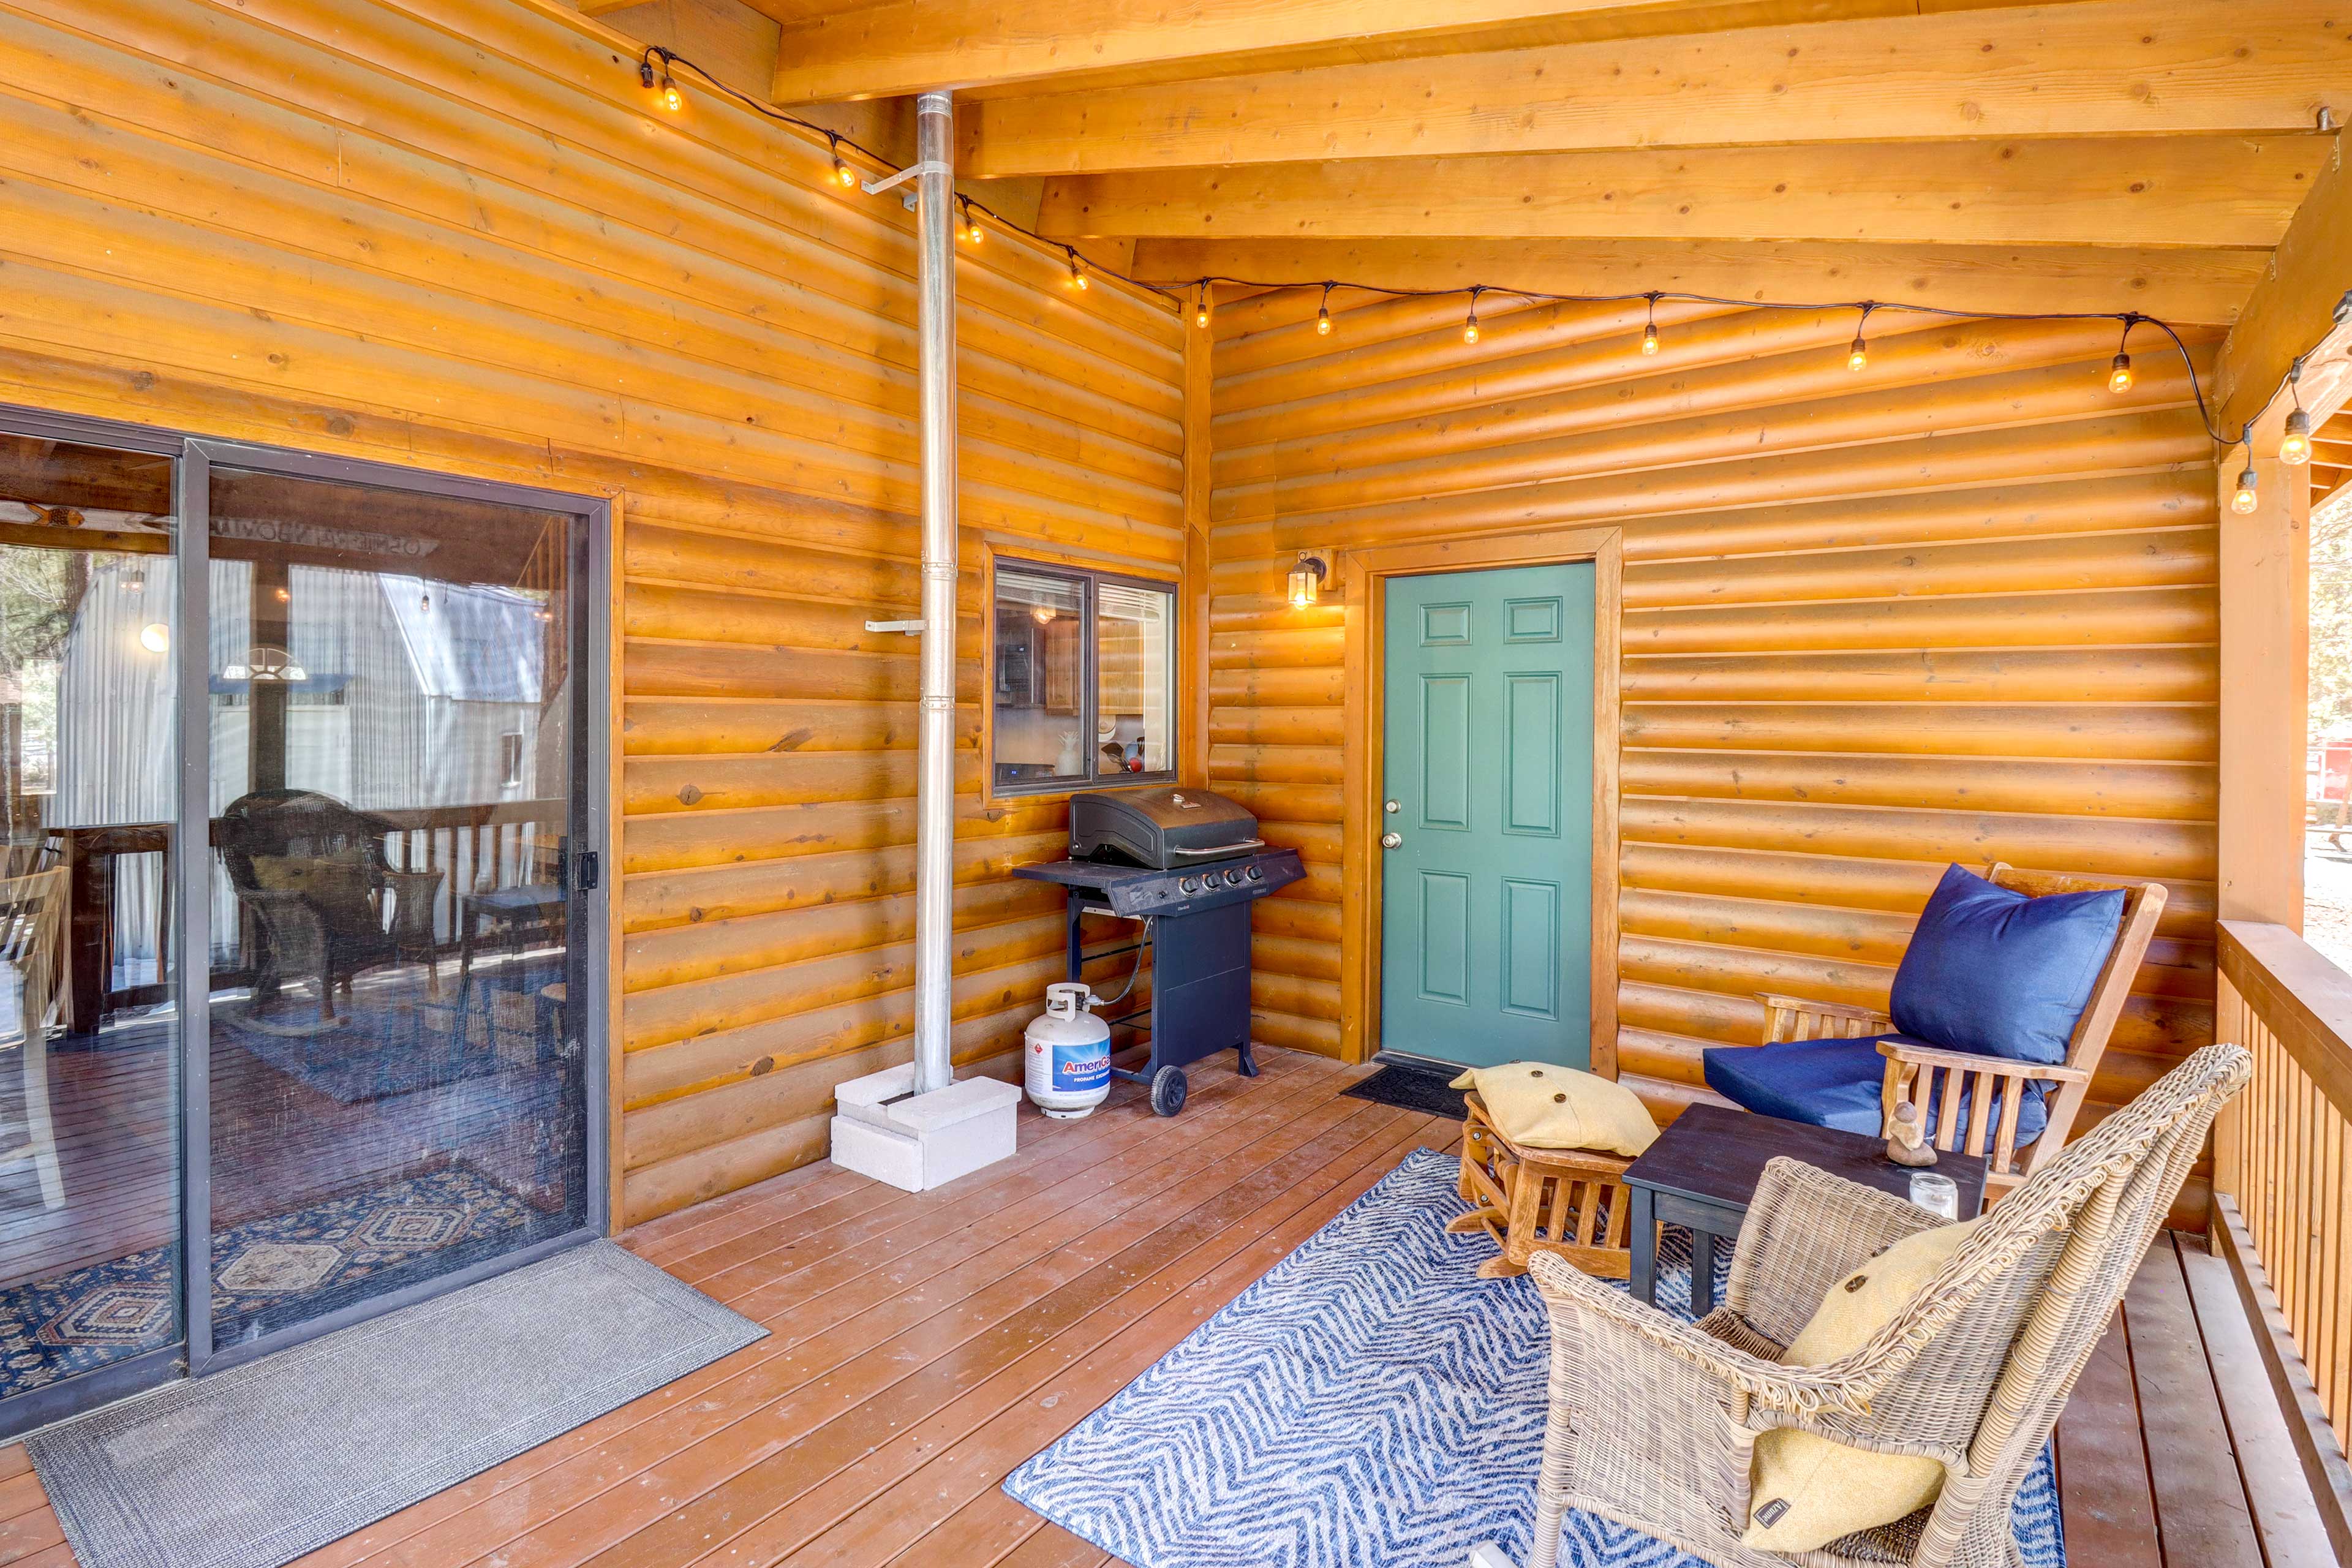 Property Image 2 - NEW! Lakeside Cabin Rental - Close to Hiking